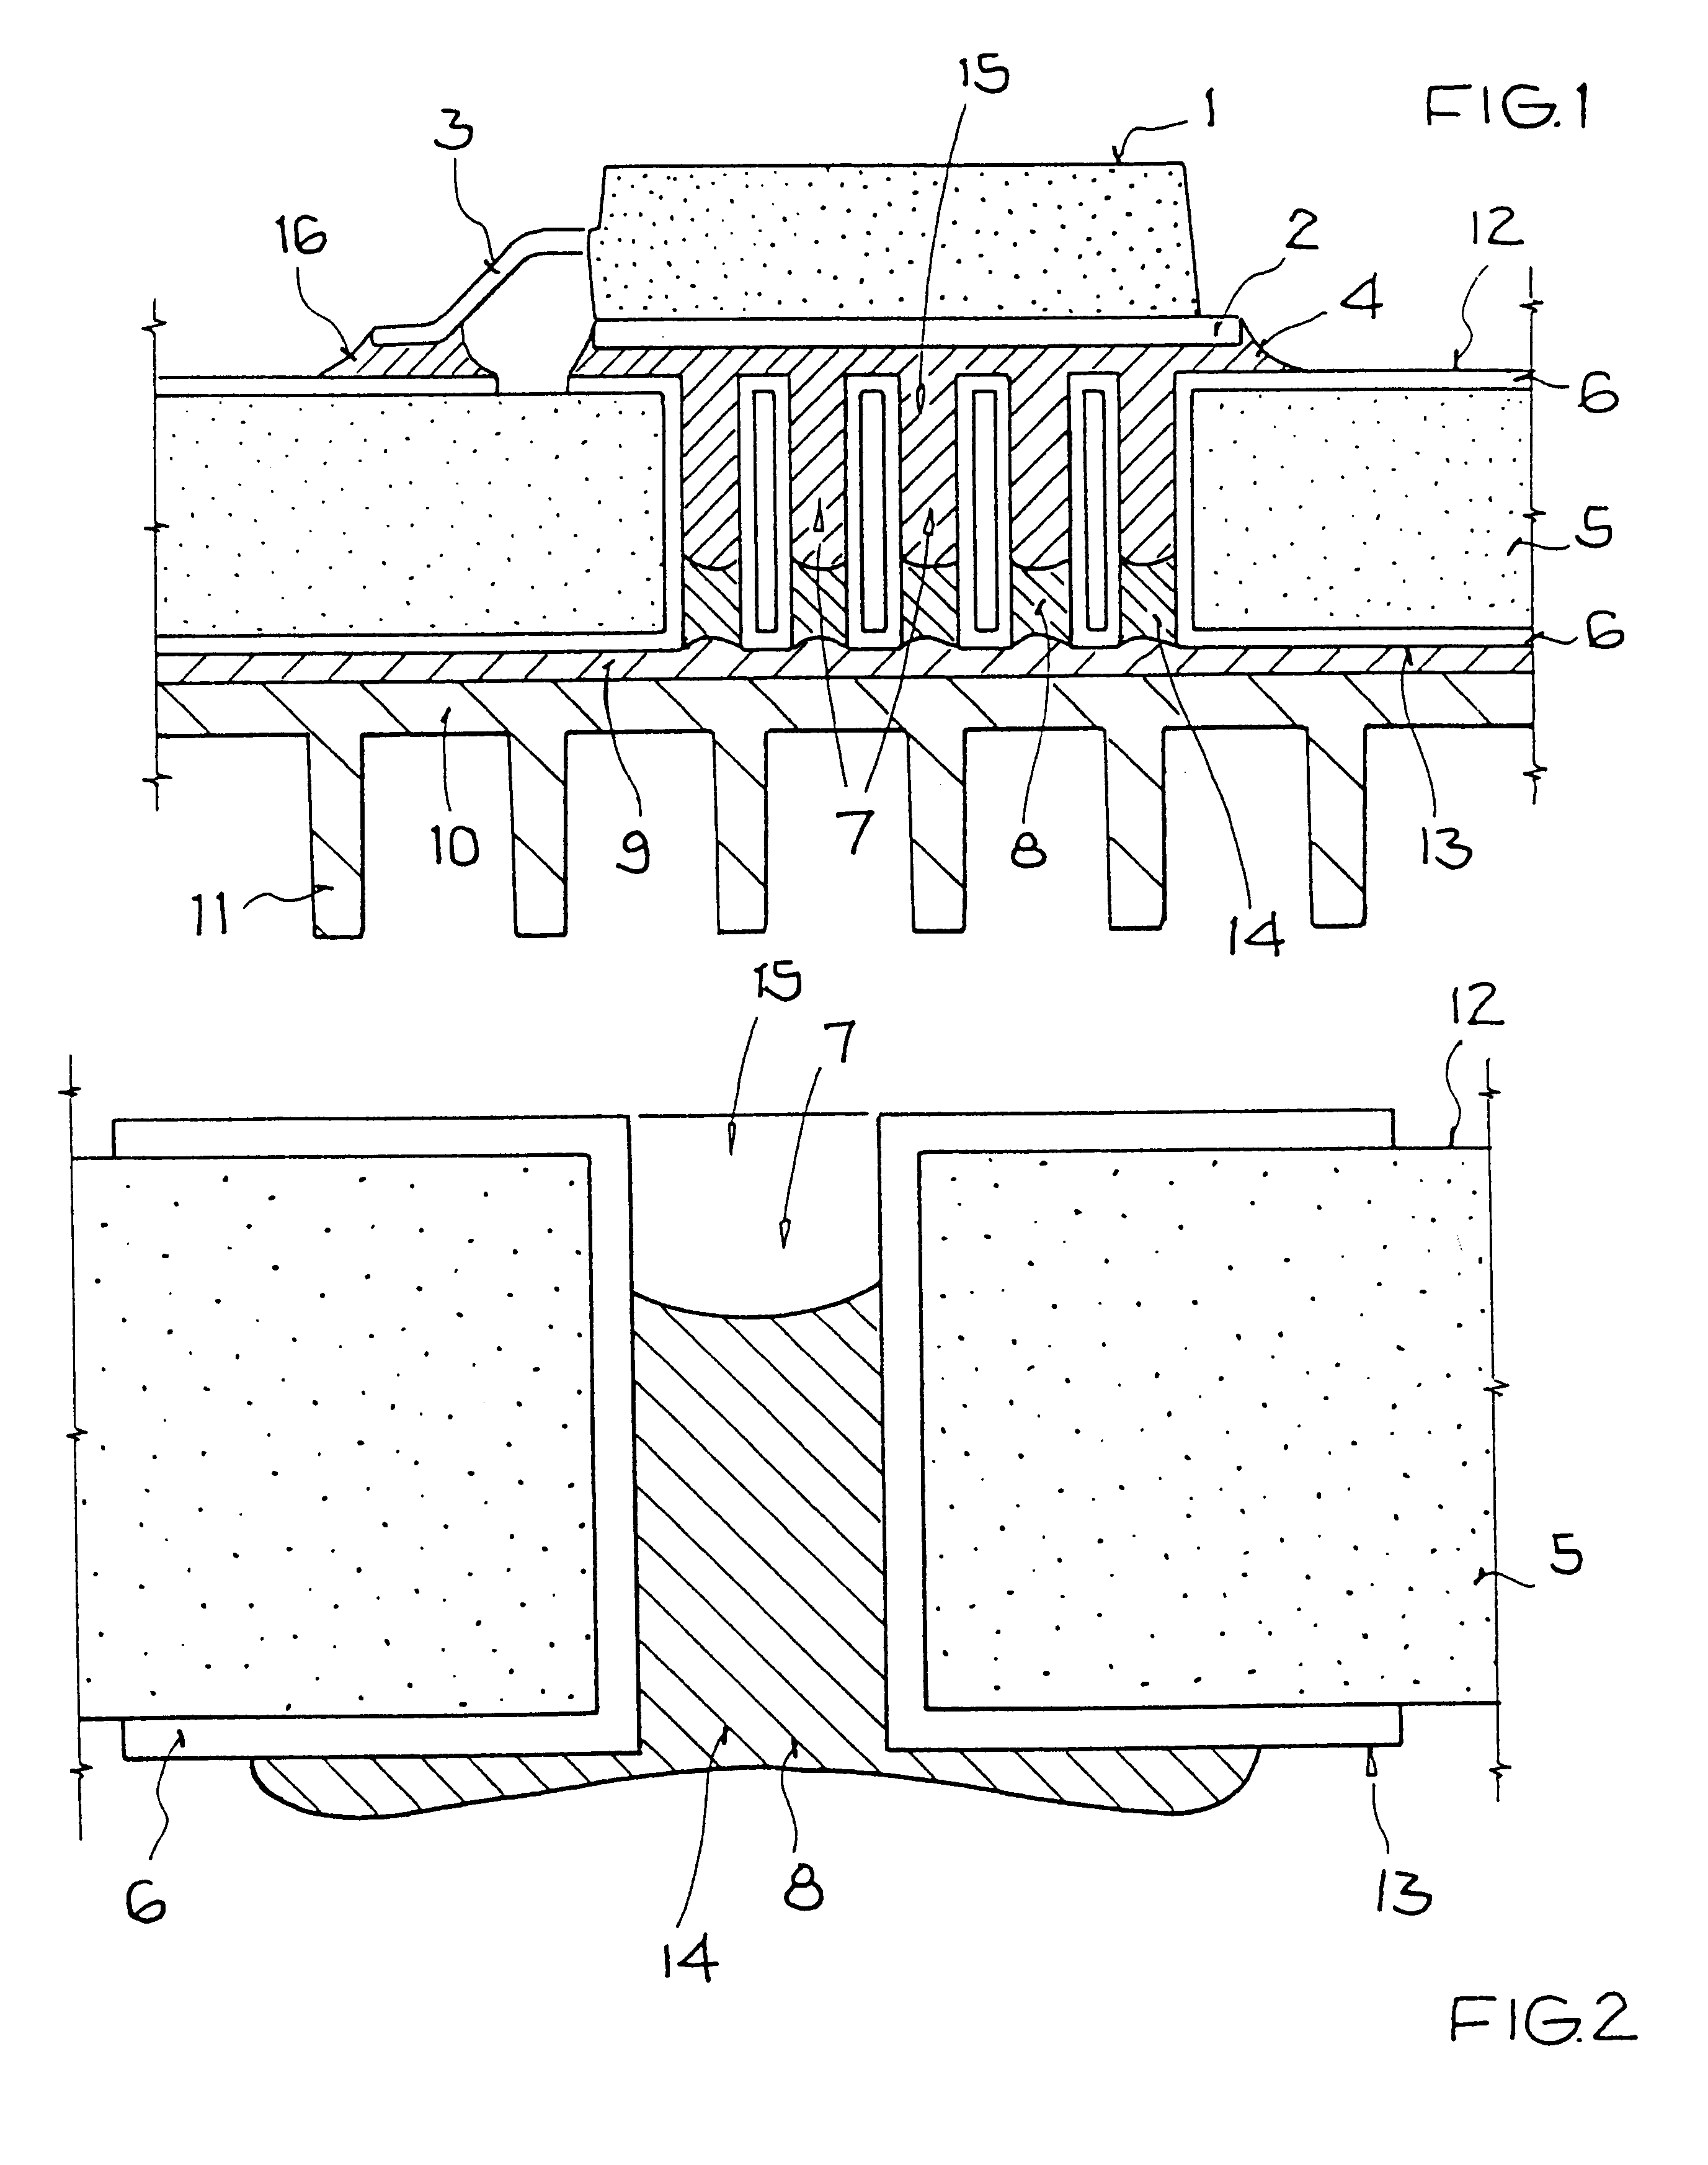 Method of fabricating a circuit arrangement with thermal vias